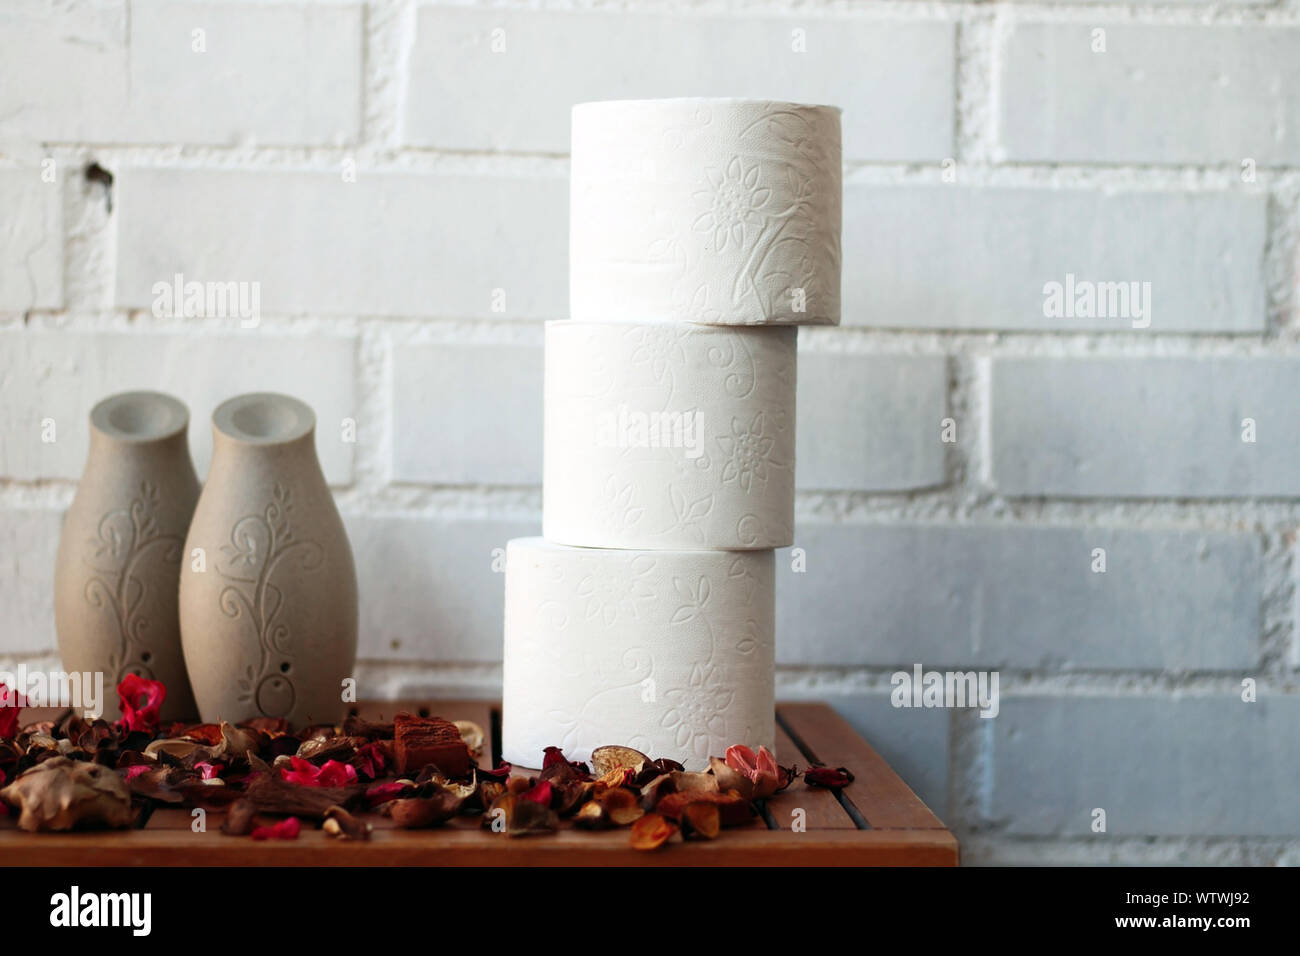 https://c8.alamy.com/comp/WTWJ92/white-toilet-paper-rolls-and-other-home-related-objects-against-a-white-wall-copy-space-home-related-WTWJ92.jpg